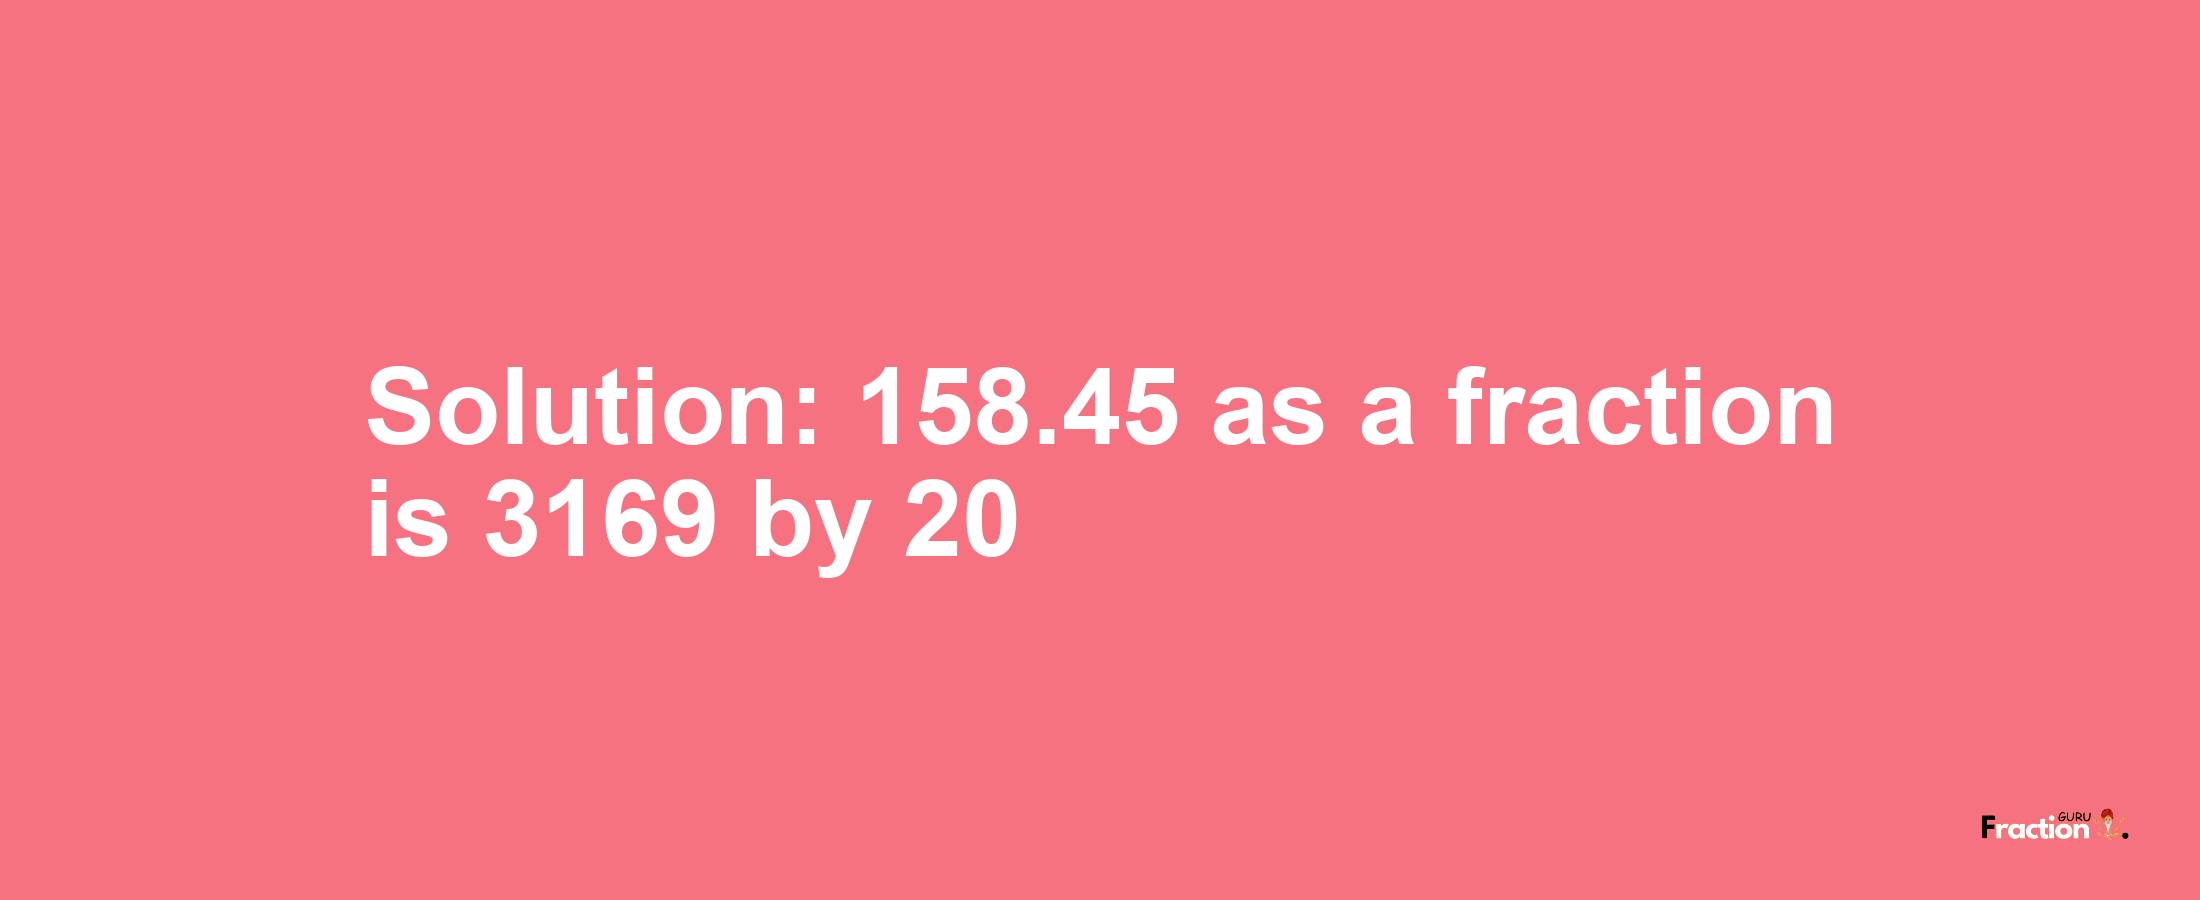 Solution:158.45 as a fraction is 3169/20